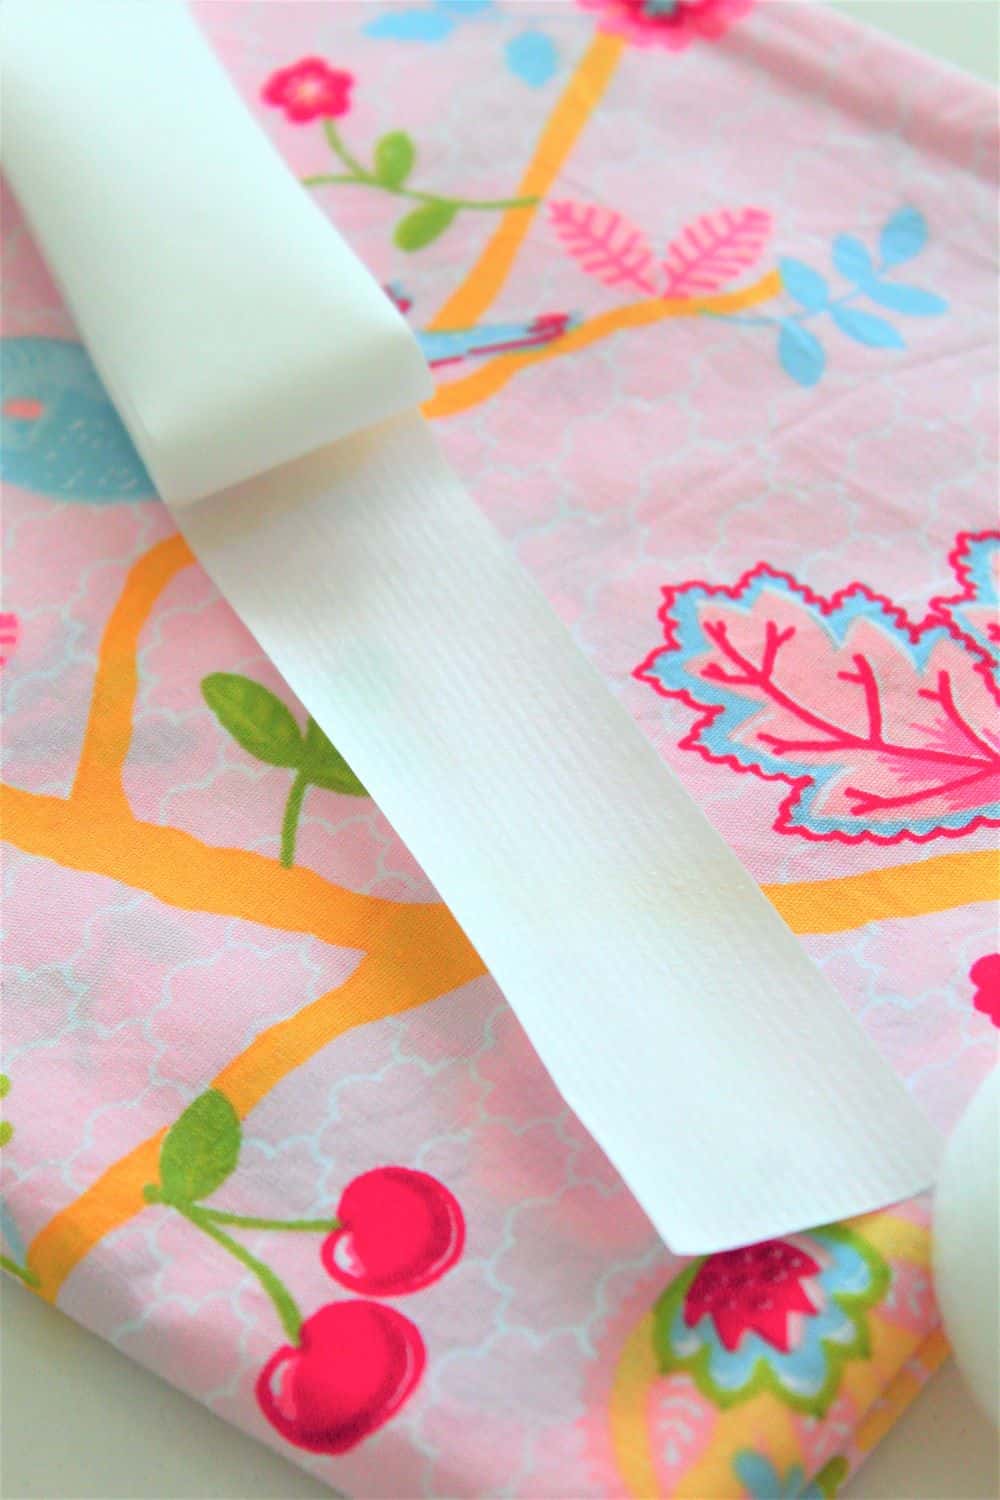 What Is HEMMING TAPE & What Does It Do? - Easy Peasy Creative Ideas